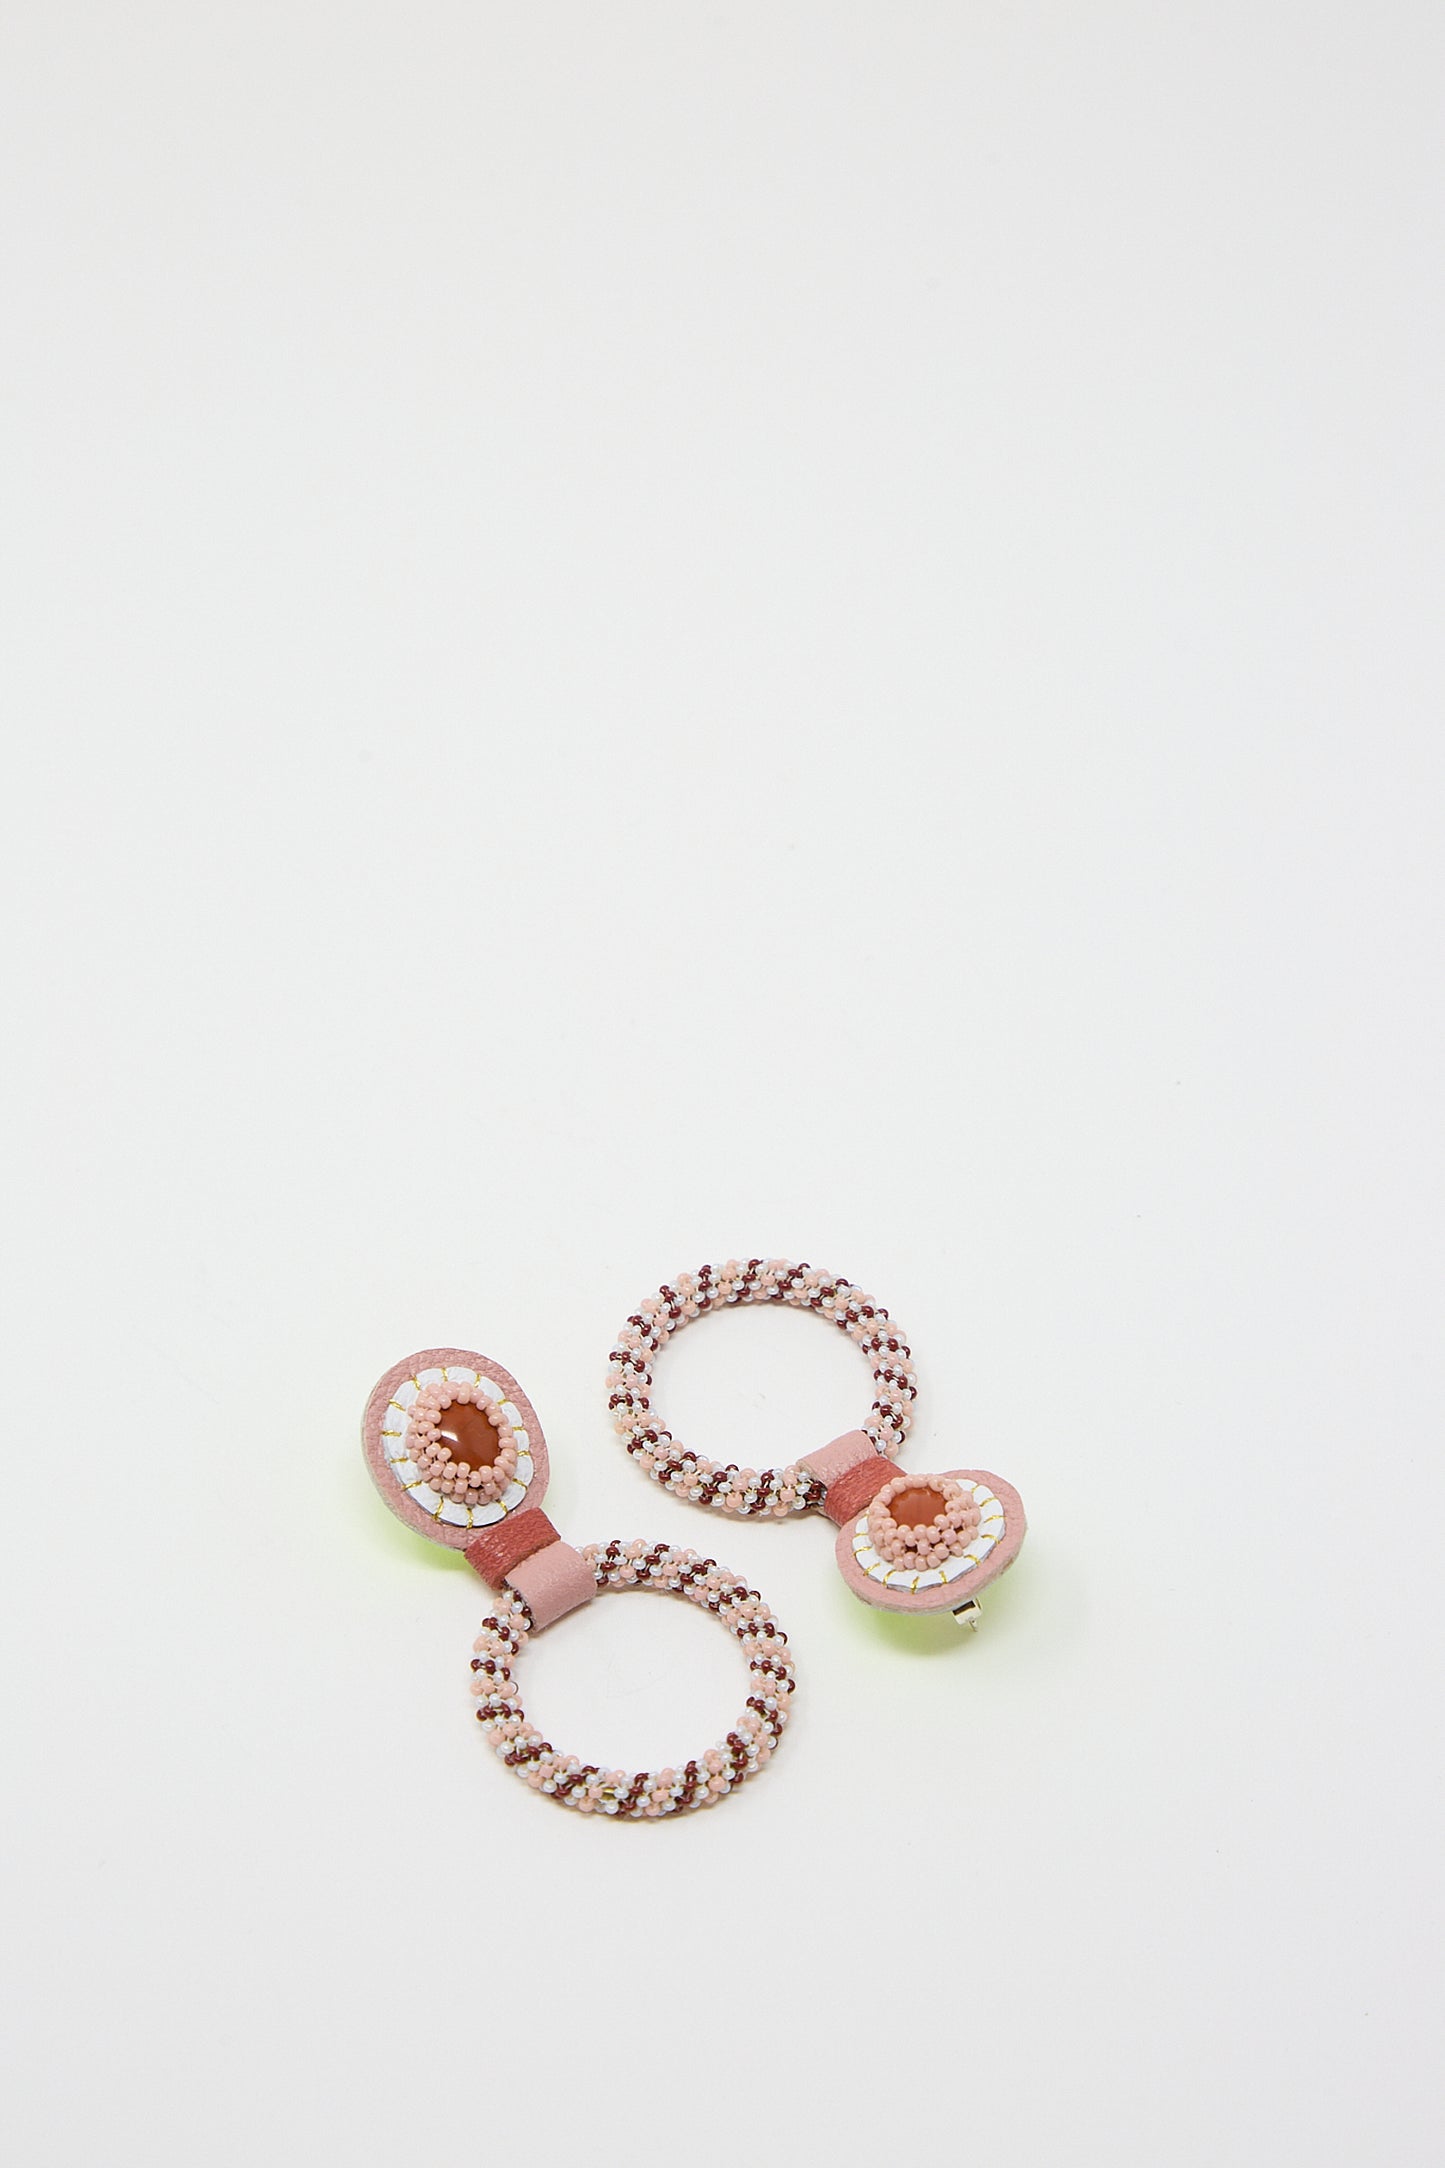 Beaded bracelets with Red Jasper stones from Robin Mollicone on a white background.